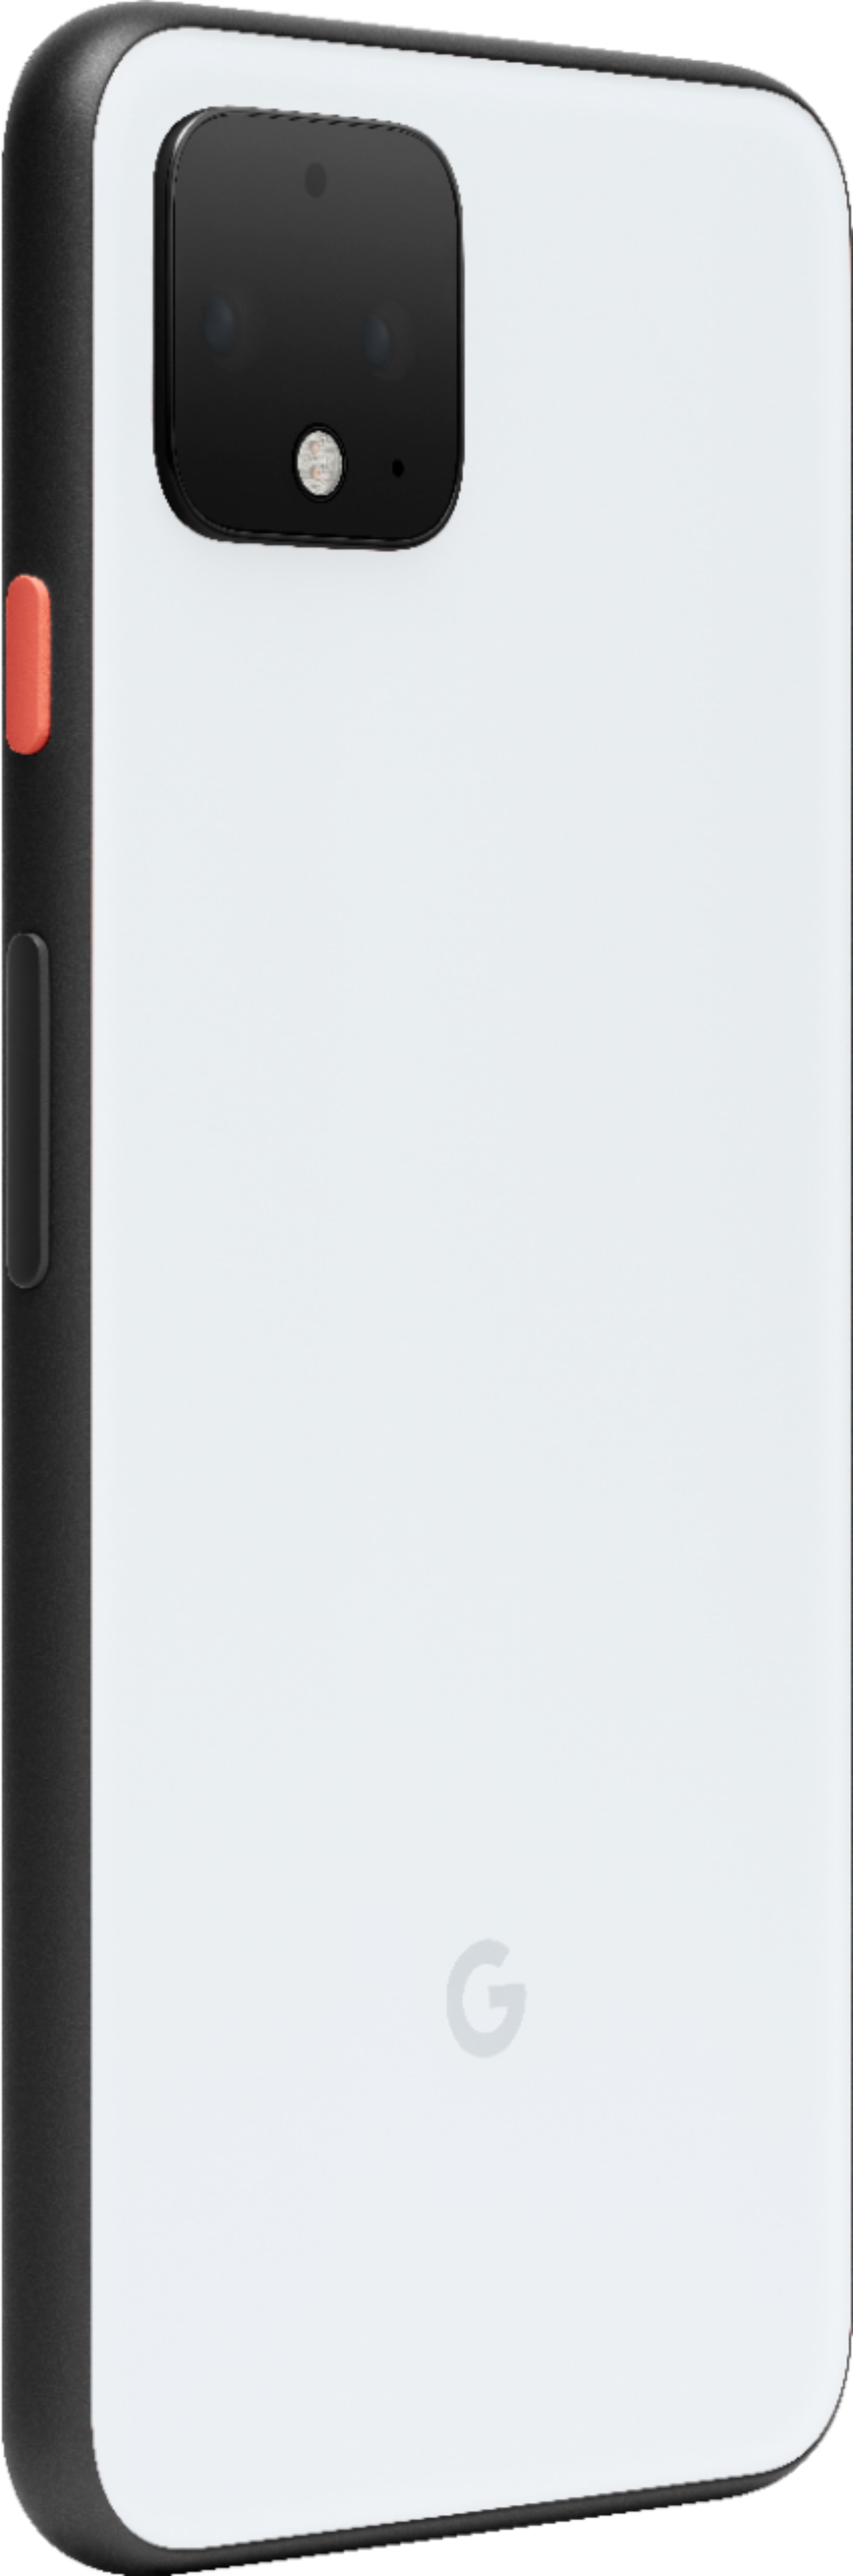 Best Buy: Google Pixel 4 with 128GB Cell Phone (Unlocked) Clearly 